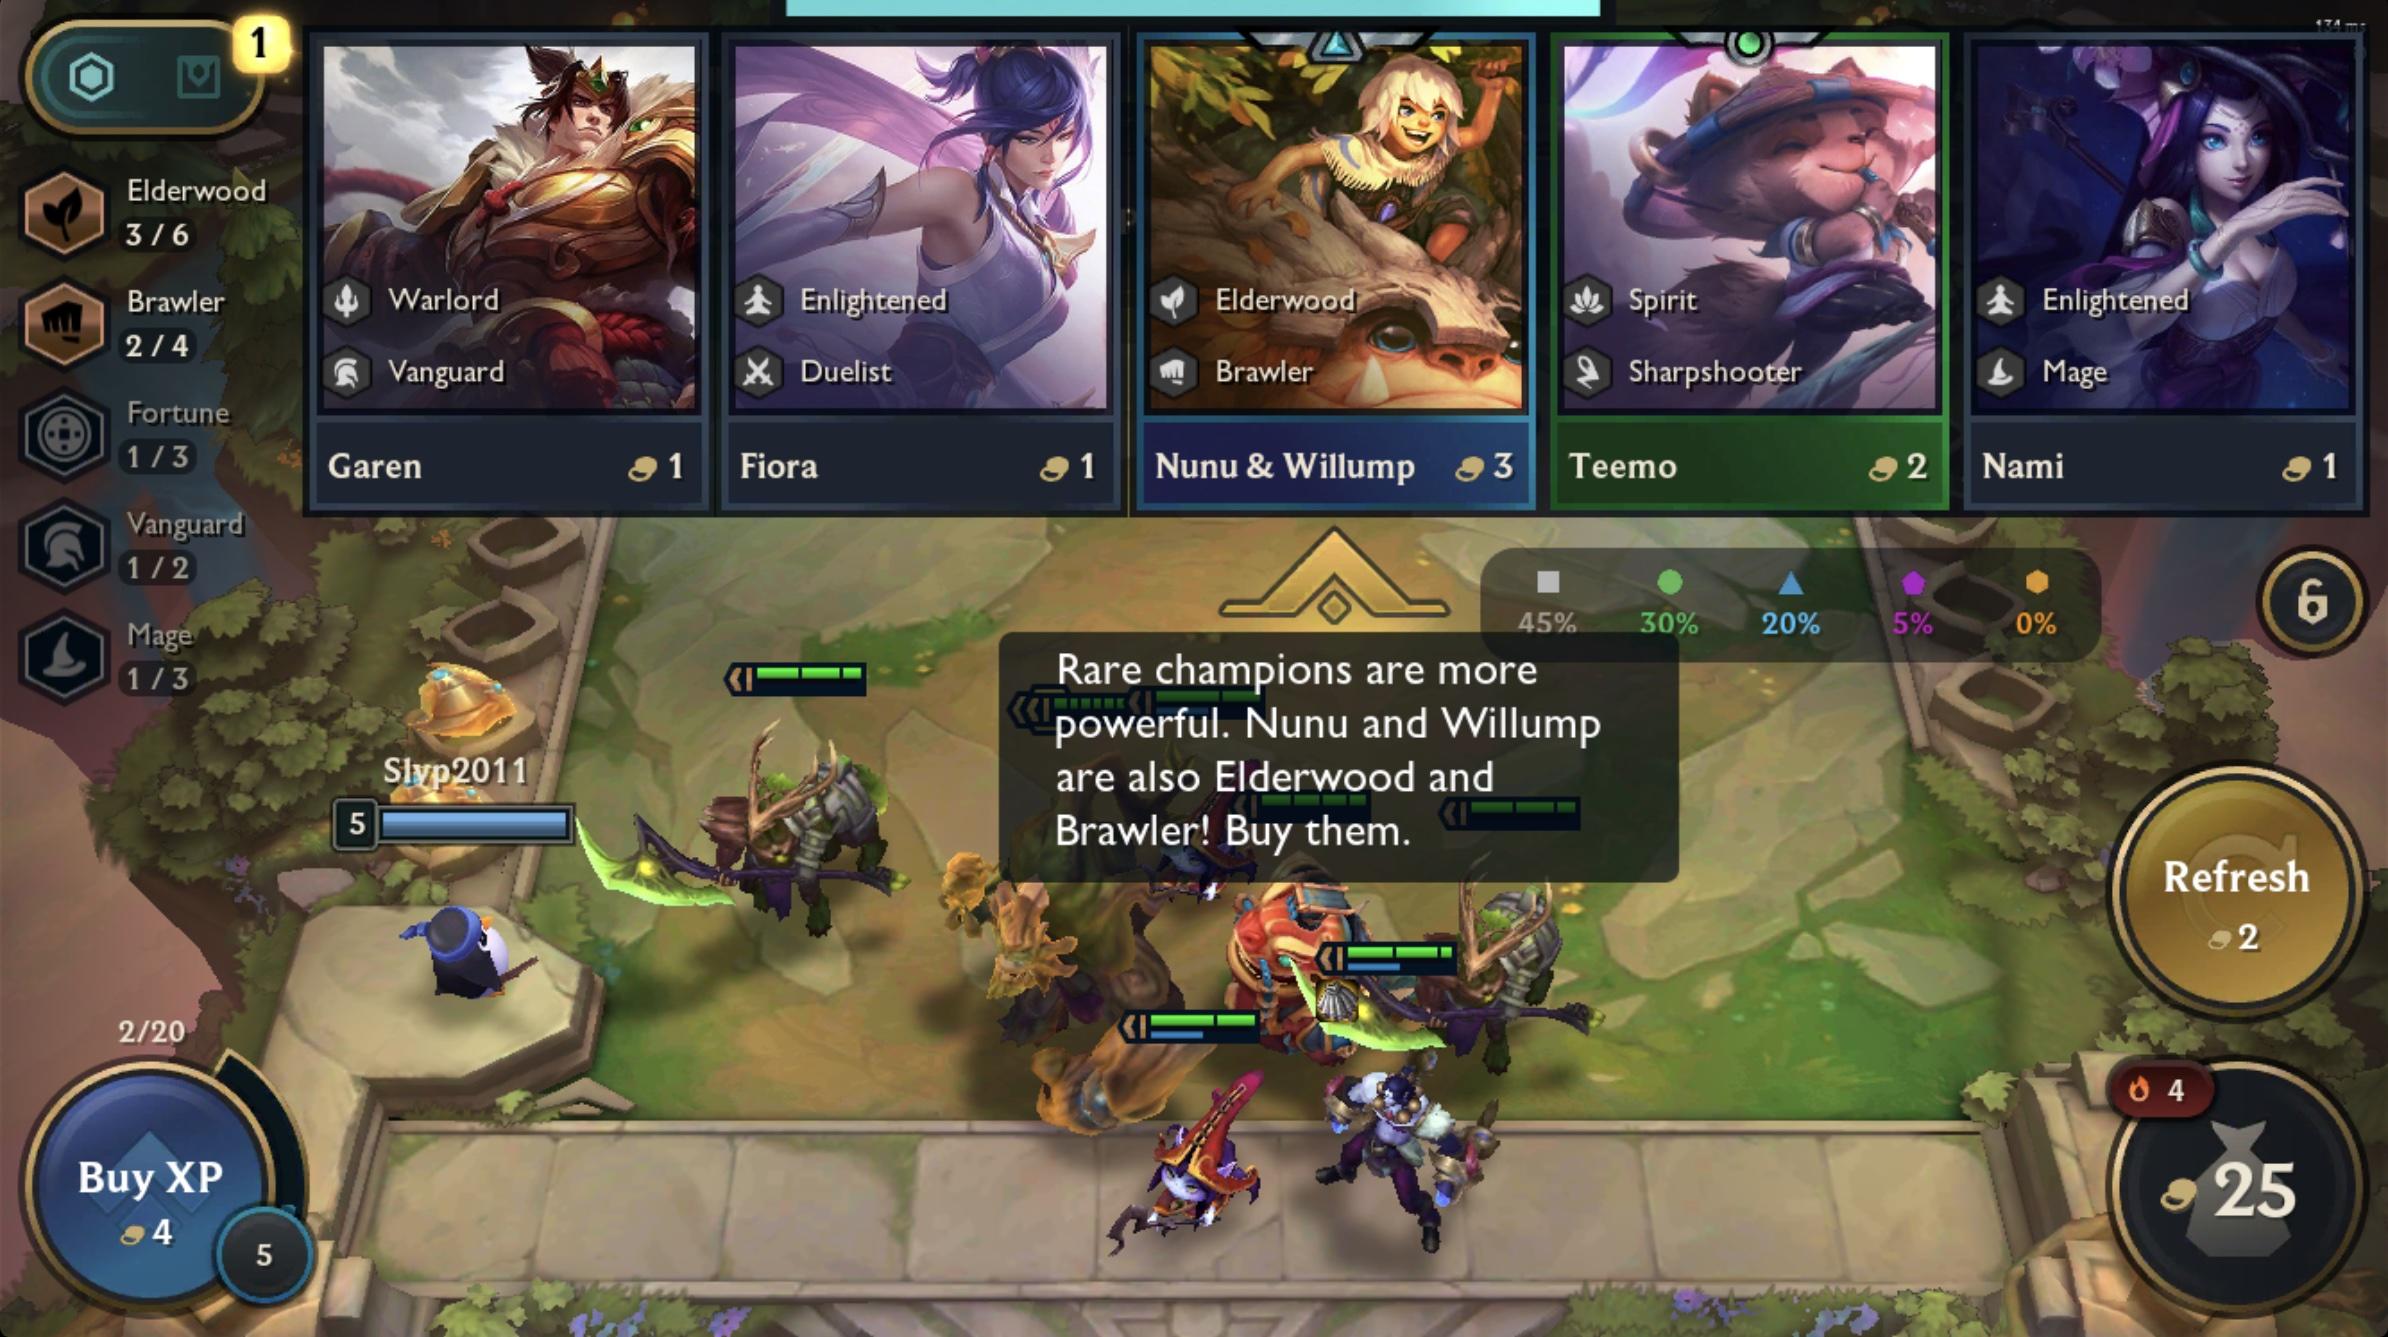 We Played Teamfight Tactics, Riot's New Auto Chess, and It's